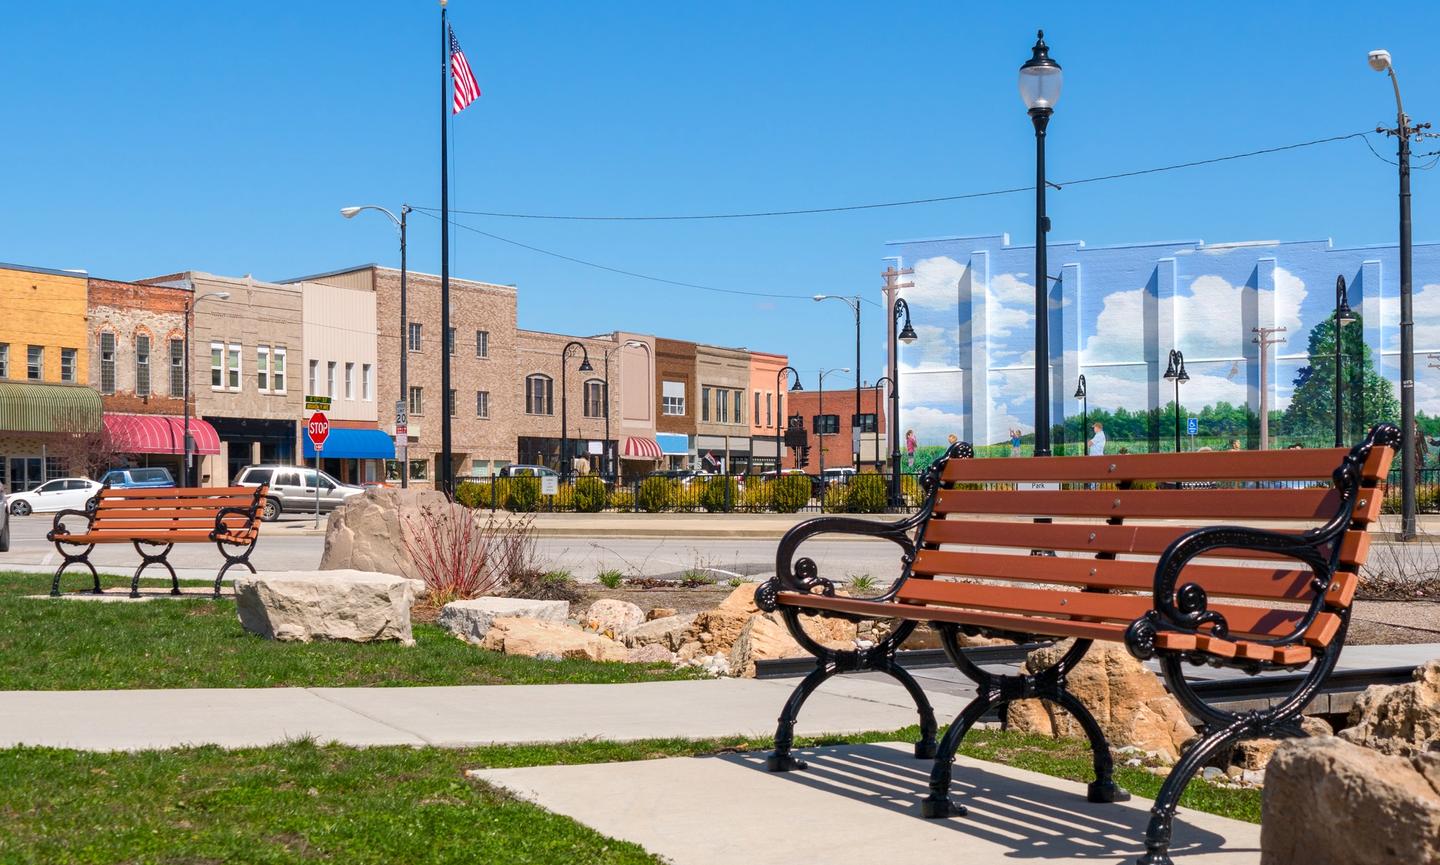 Mattoon’s small town cohesiveness offers a beautifully scaped functioning downtown area.